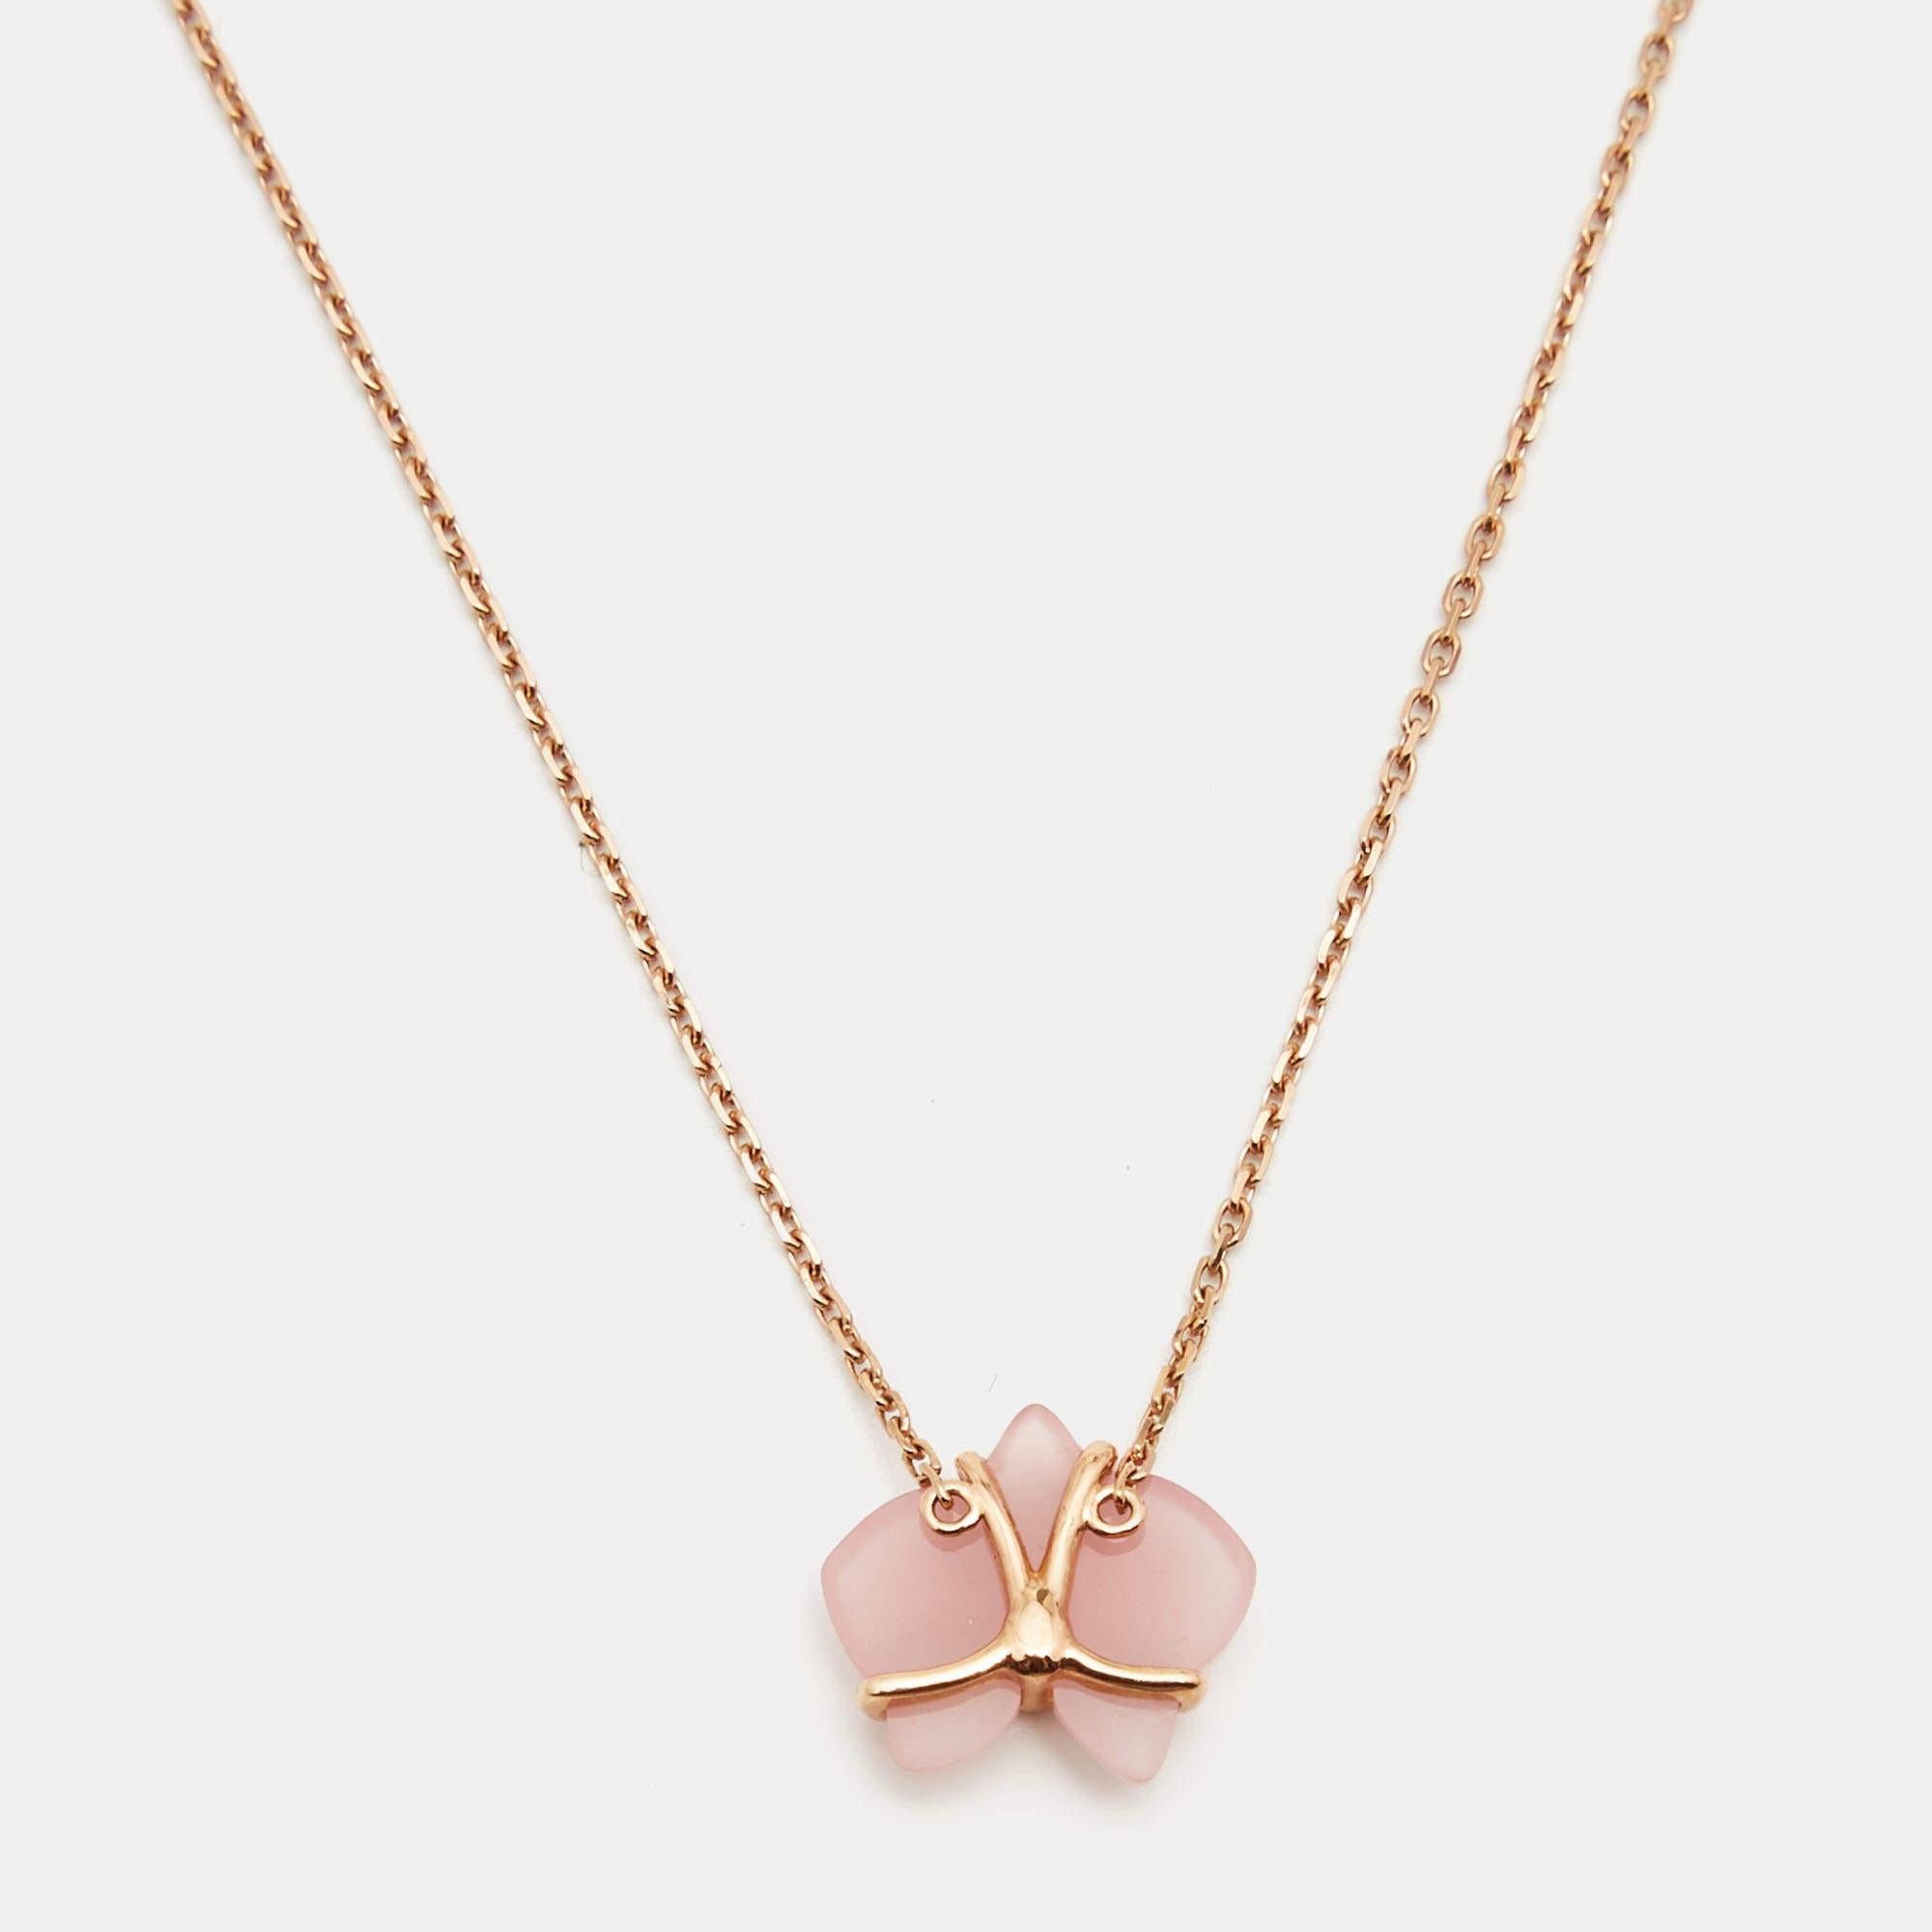 Cartier lovers will instantly recognize this Caresse d'Orchidees par necklace featuring the delicate orchid pendant rendered in pink chalcedony, as this popular flower is one of the classic motifs of the label's jewelry. An embodiment of feminine